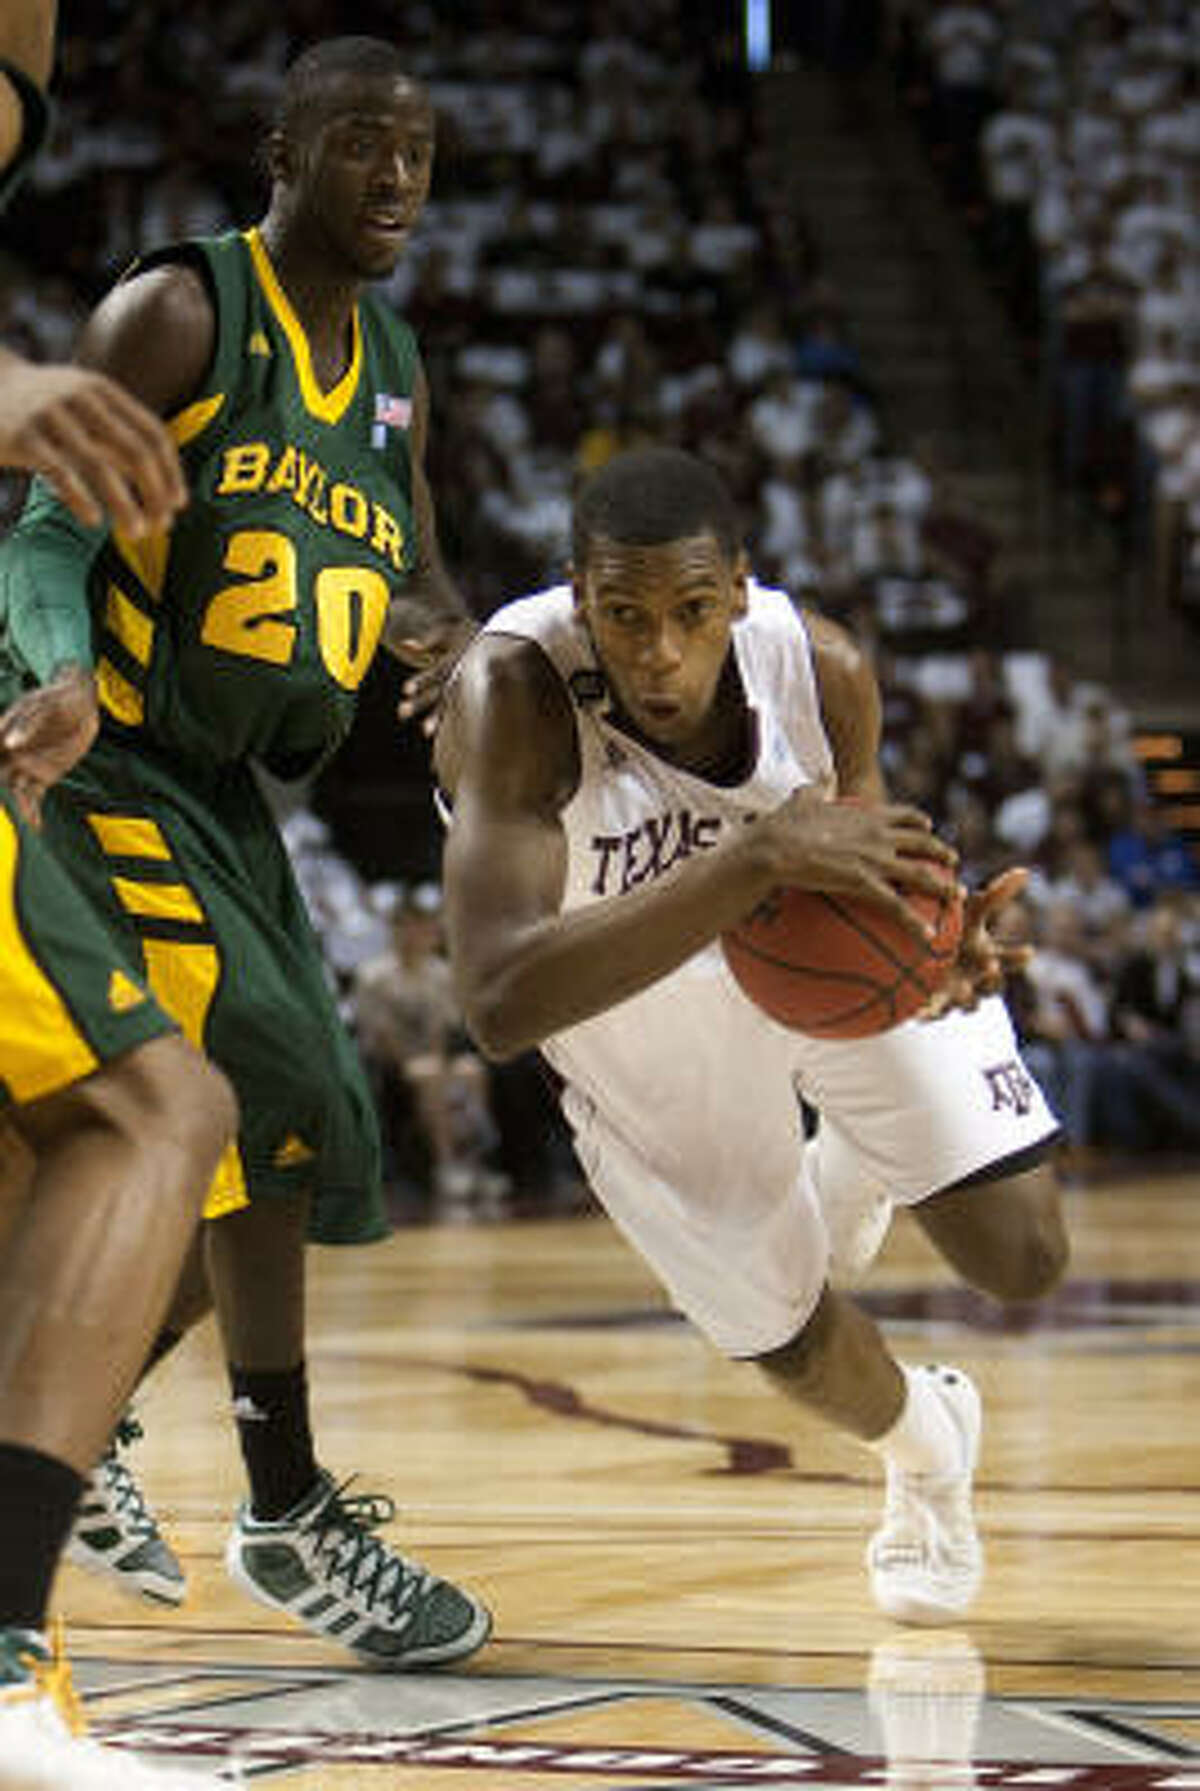 Texas A&M's Khris Middleton attempts to get past Baylor's Stargell Love.